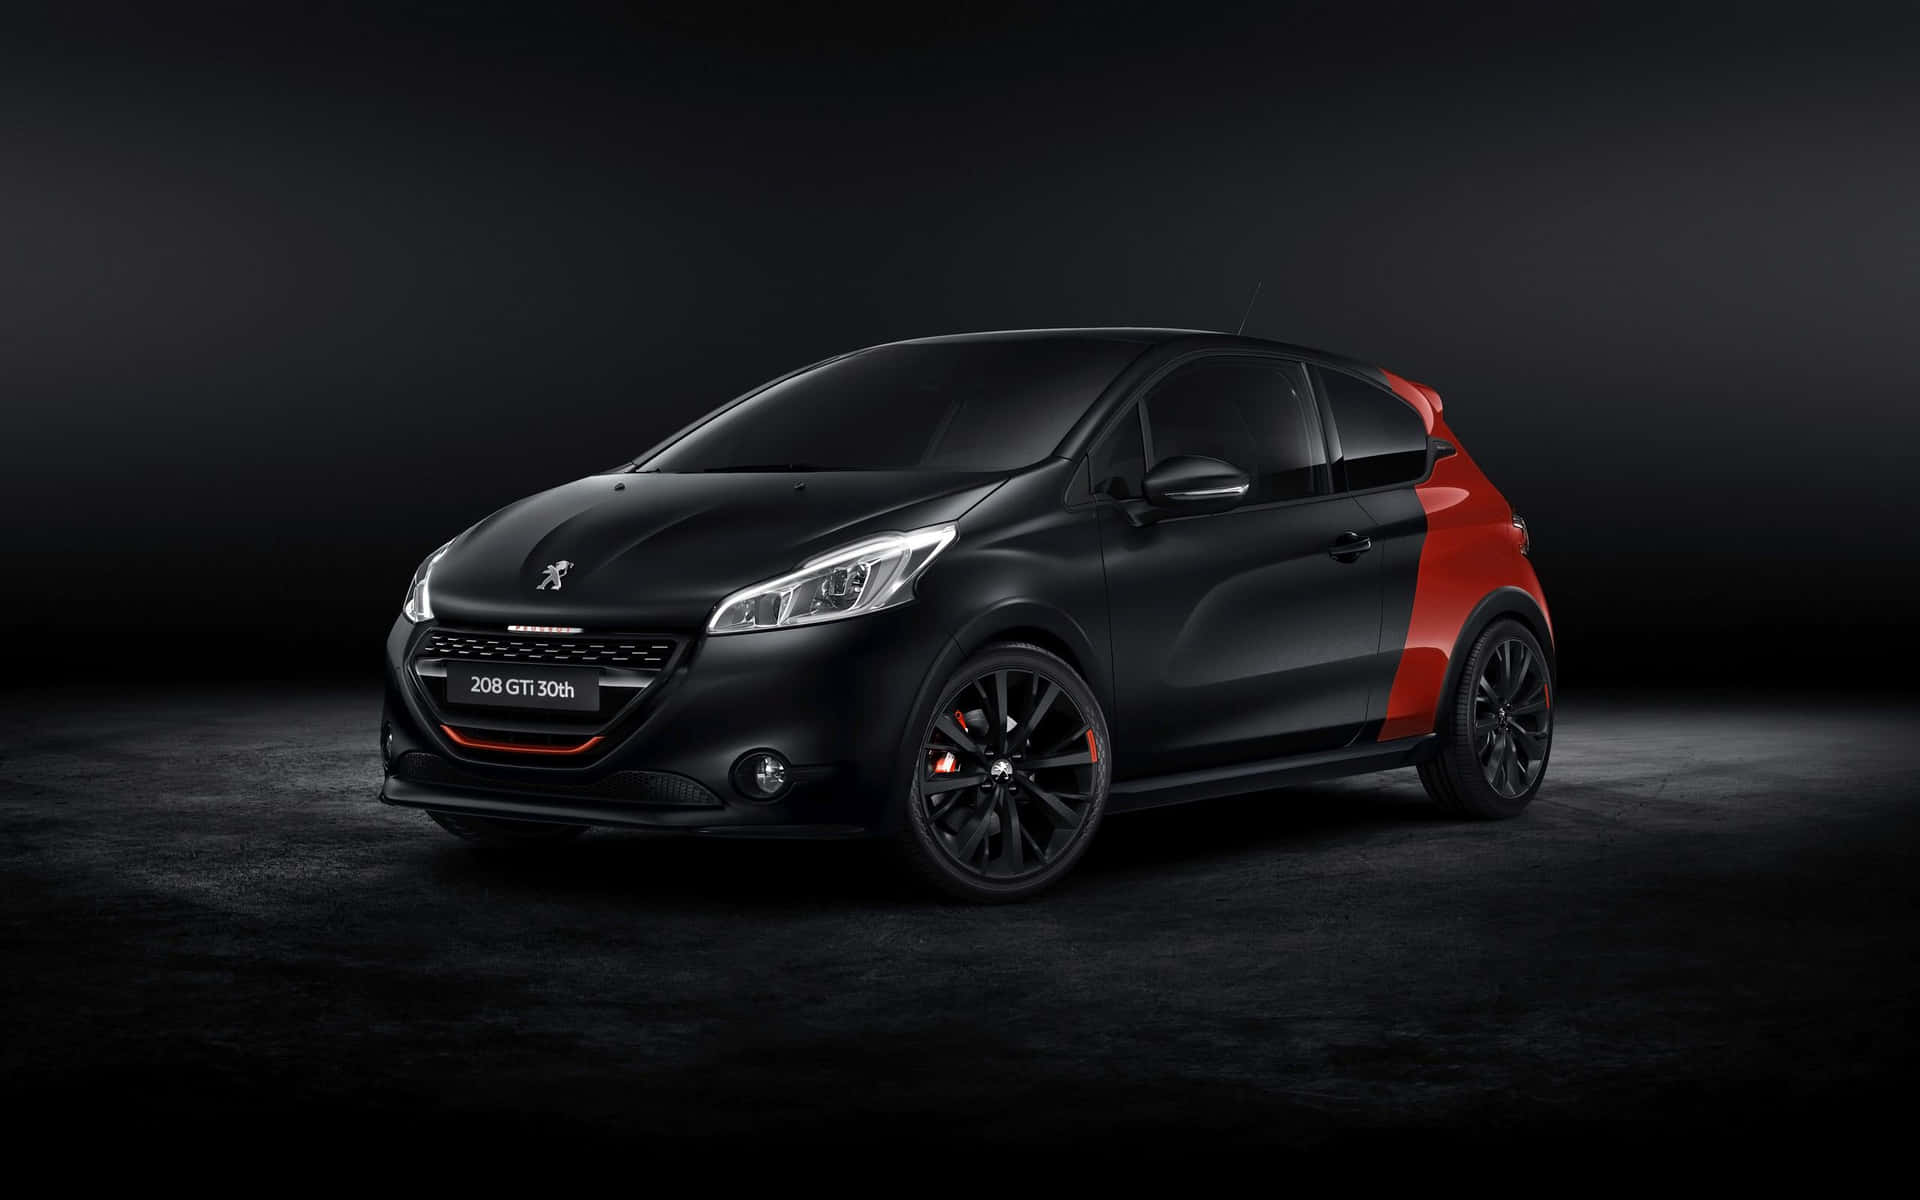 Sleek and Stylish Peugeot 208 in Action Wallpaper